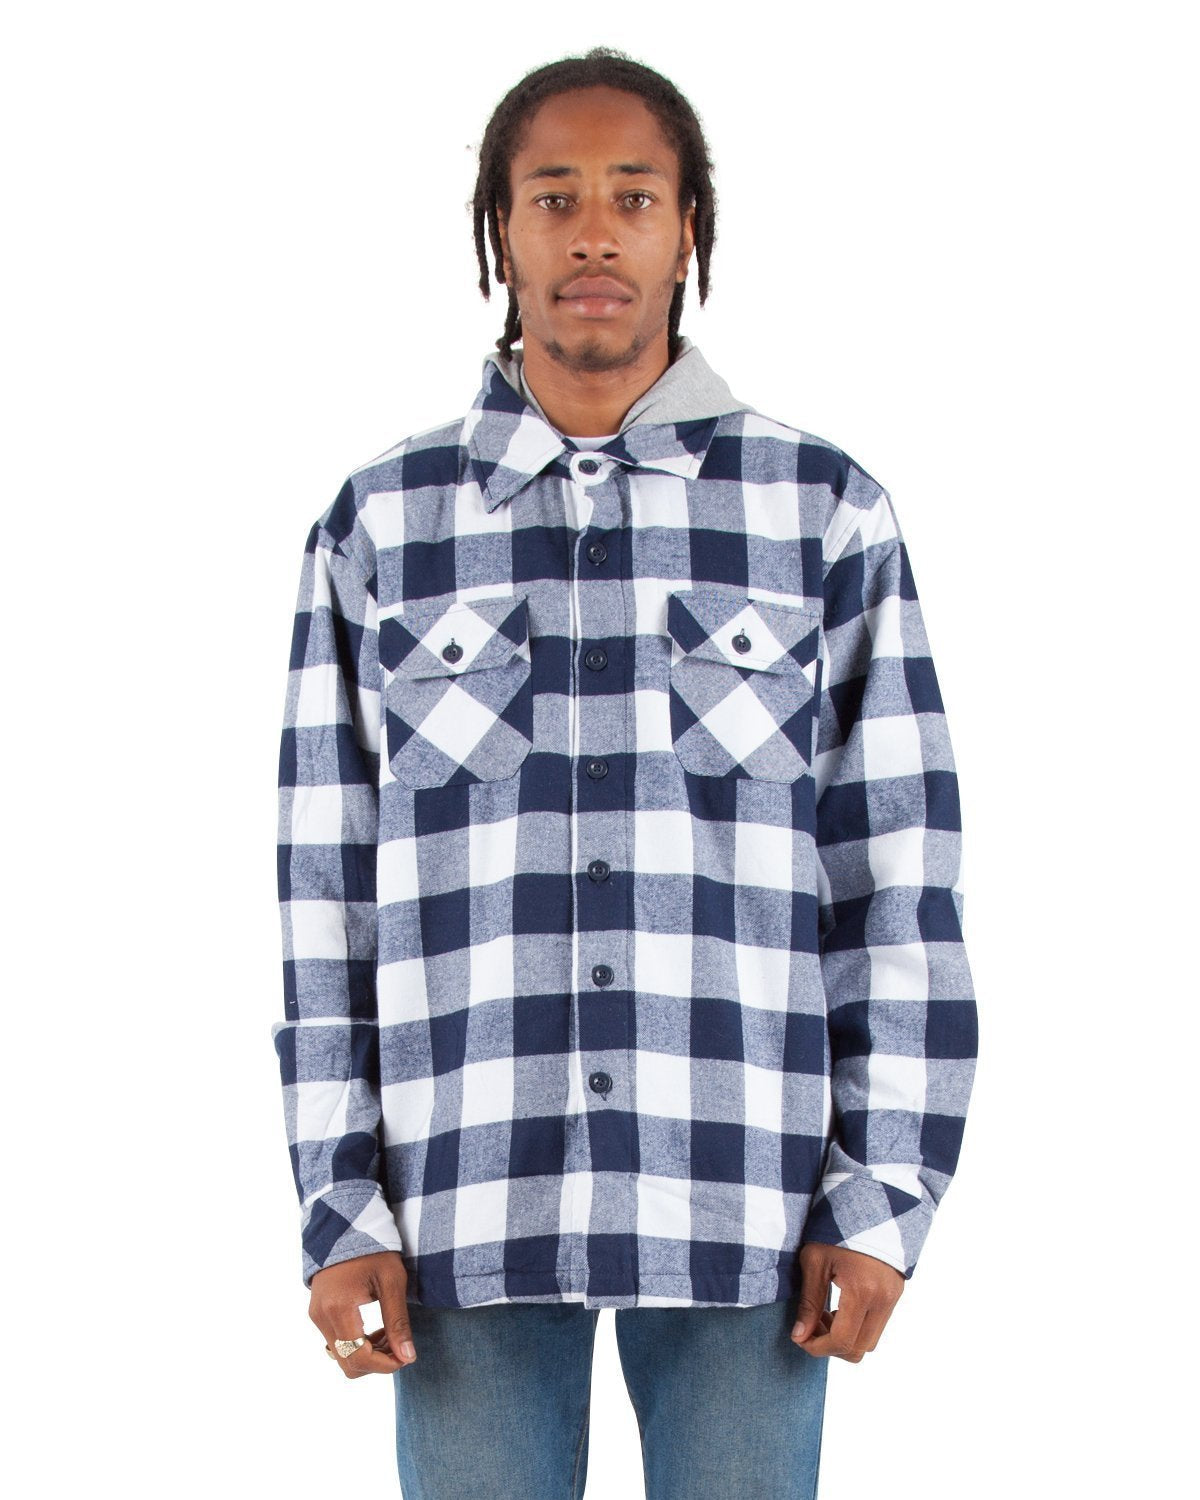 Flannel Jacket XL / White and Navy